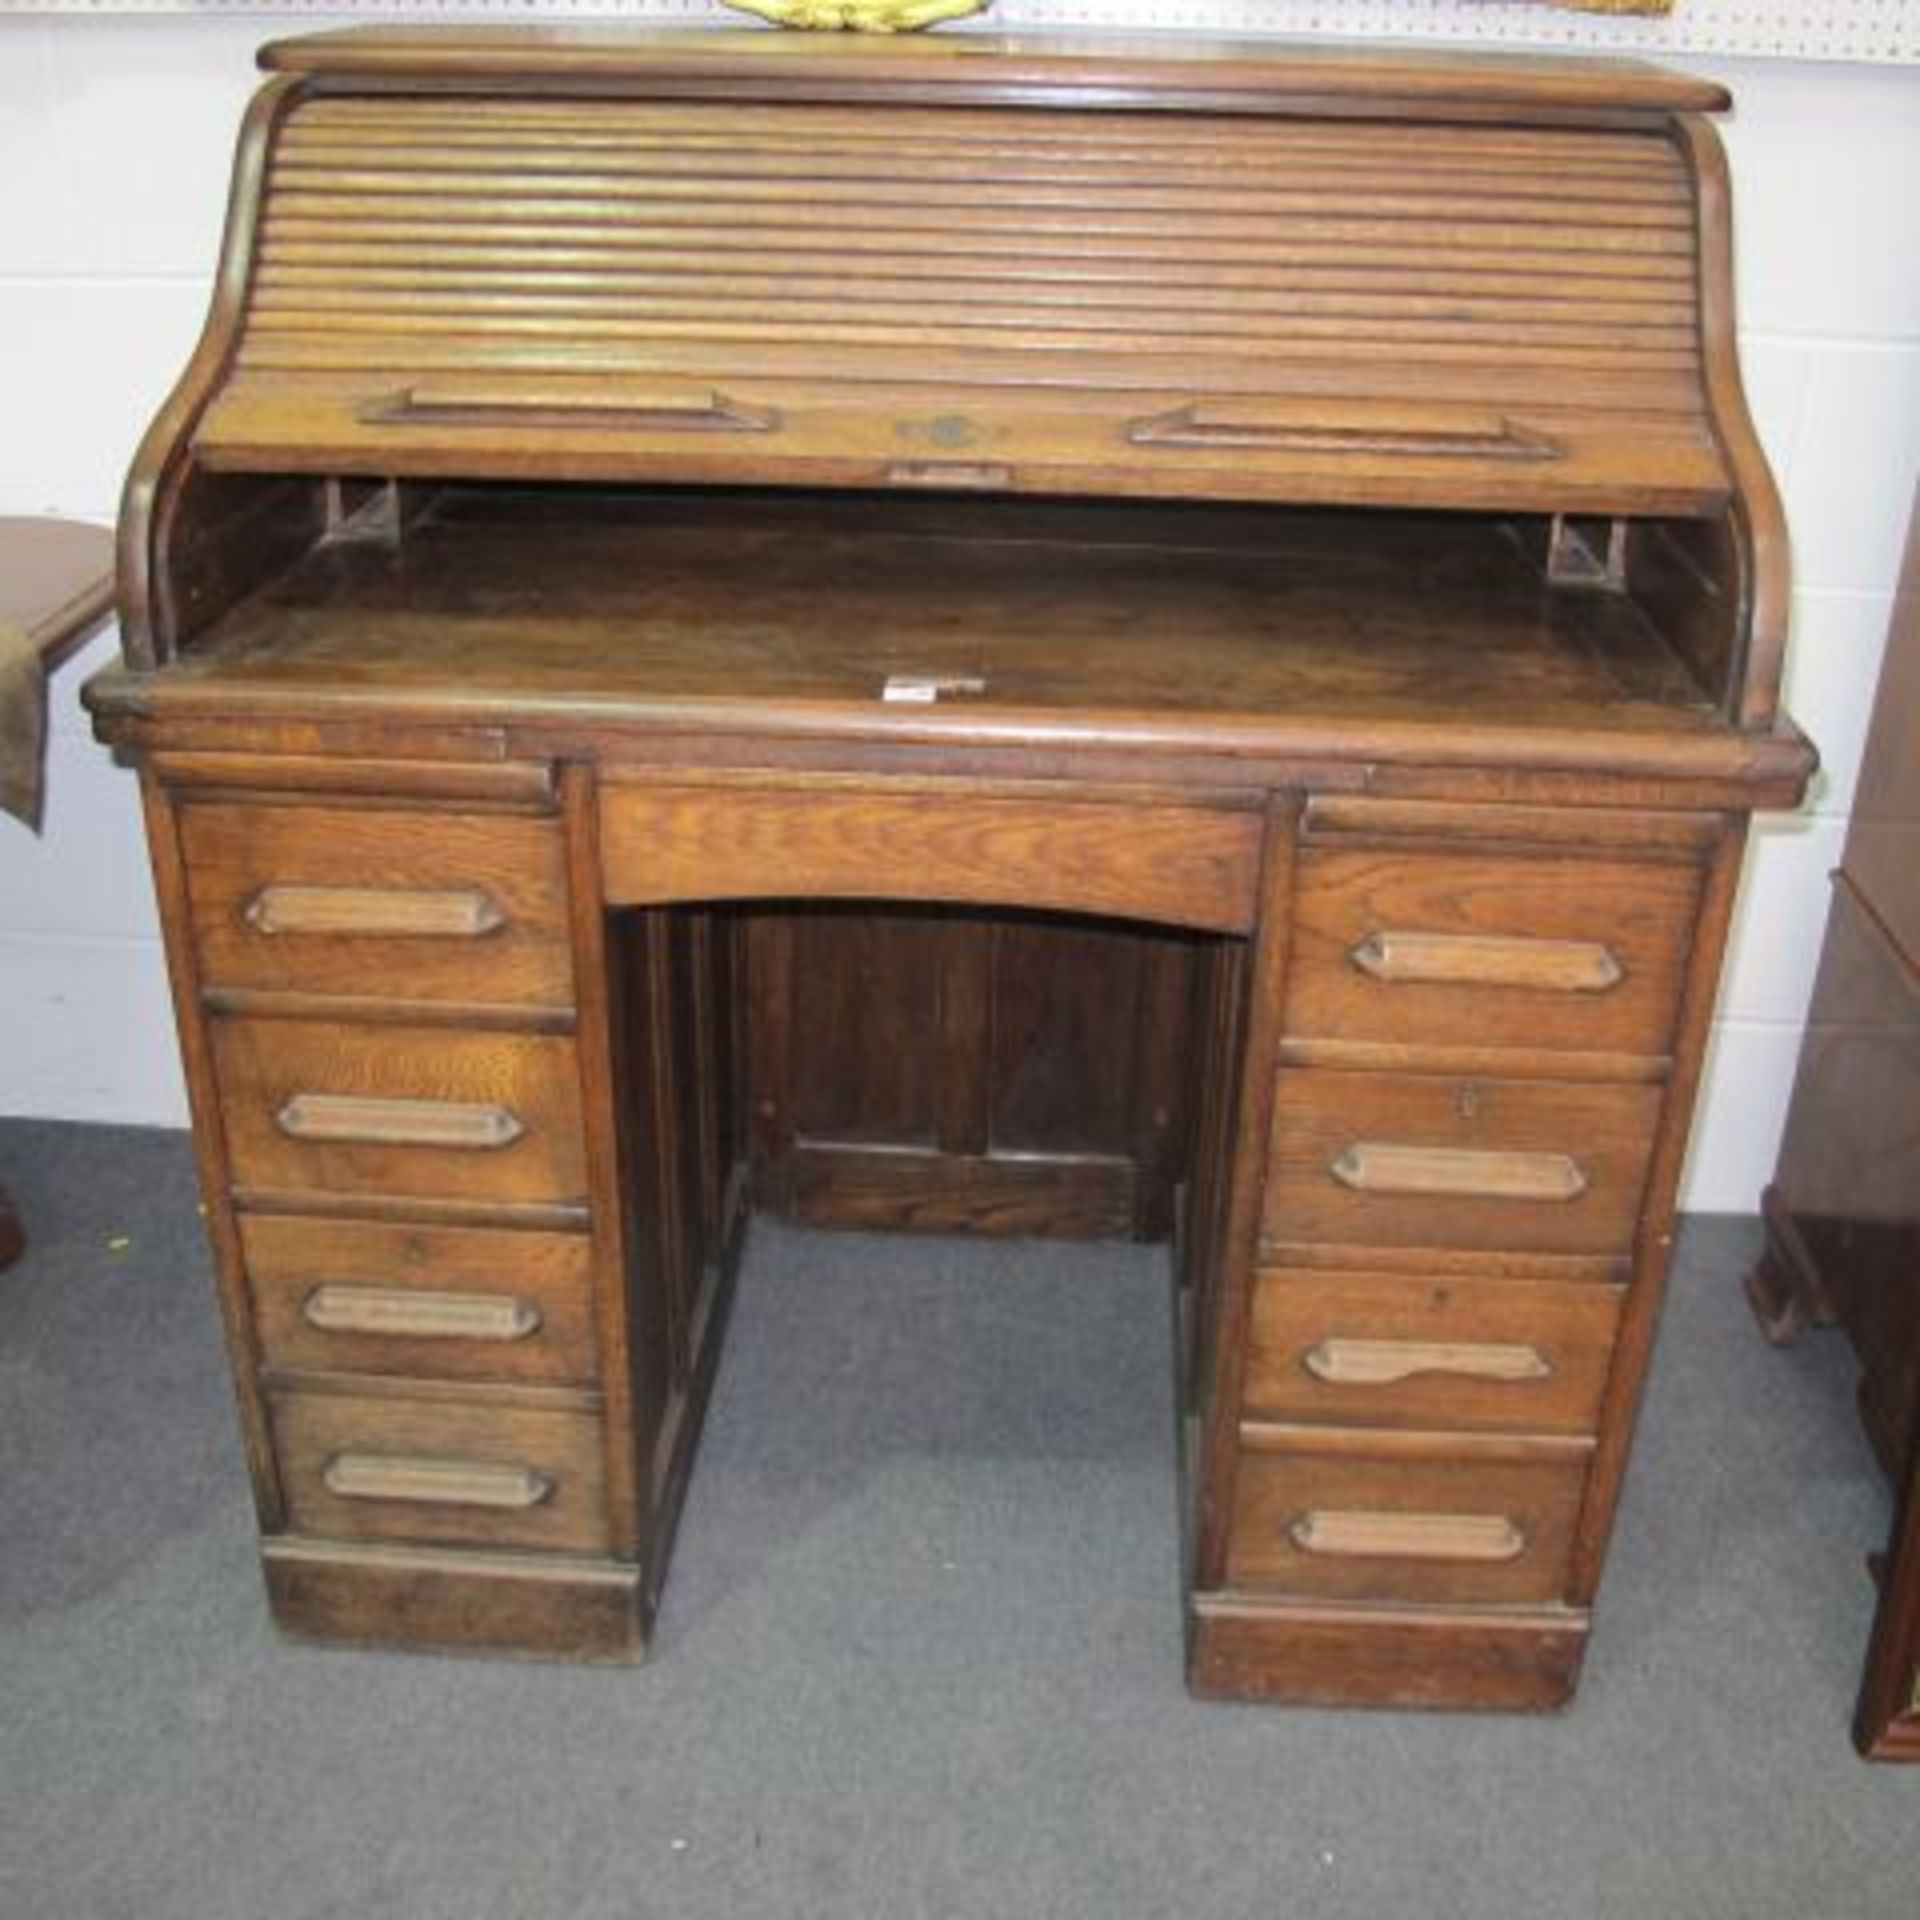 An Early C20th. Oak Small Roll-Top Desk with S-Shaped Tambour over Two Floor Drawer Pedestals.